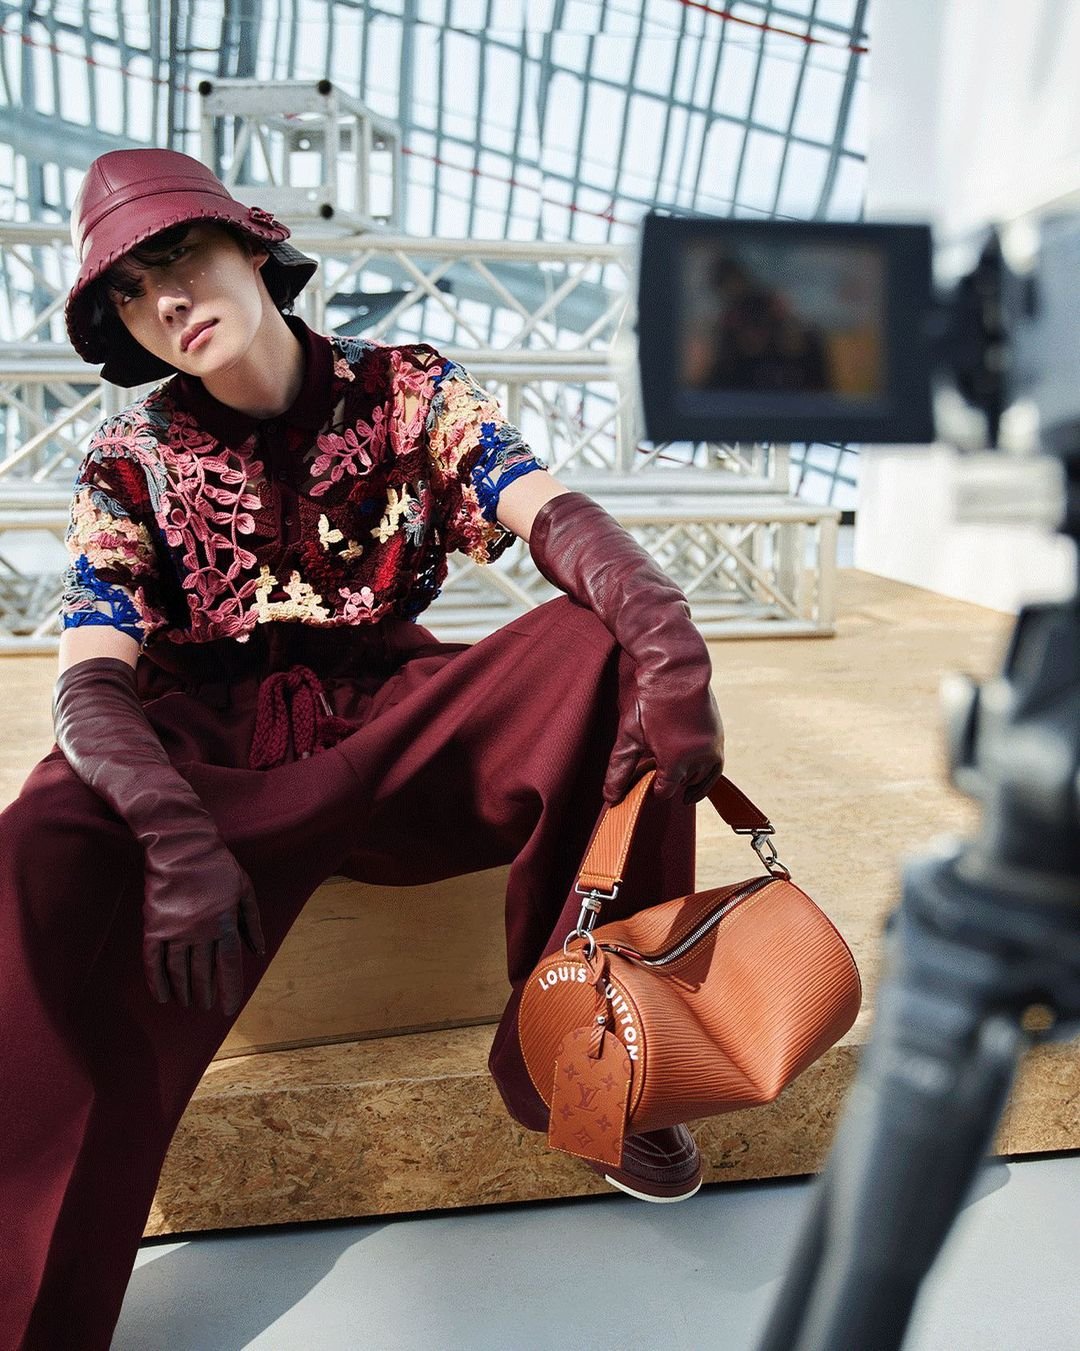 Check out J-hope of BTS' first campaign for Louis Vuitton